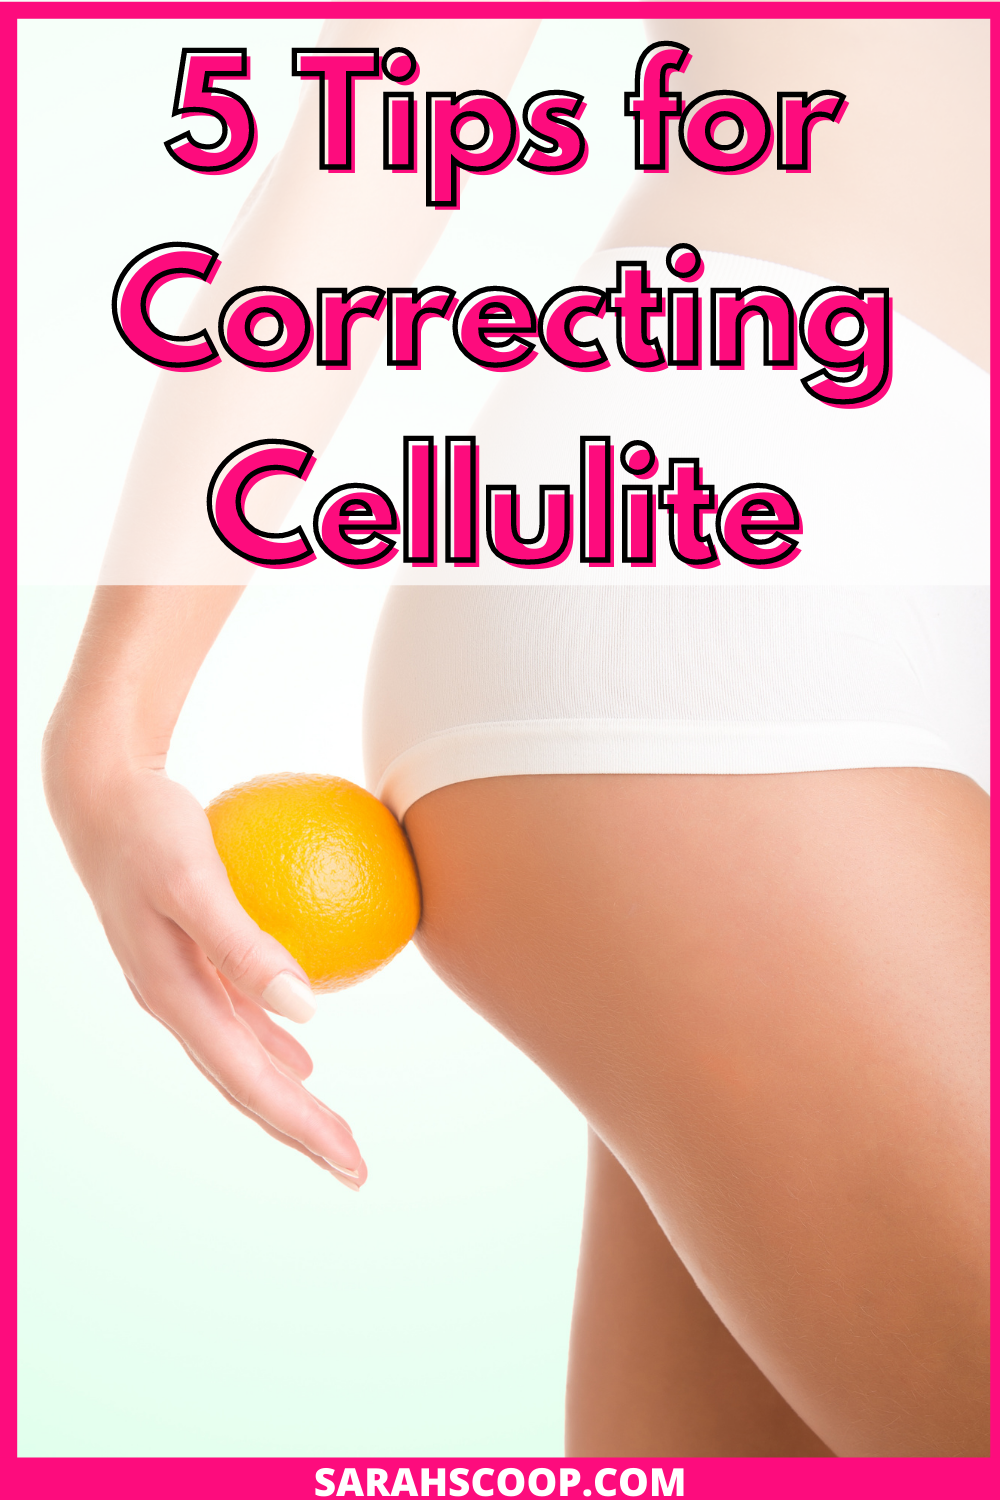 5 tips for reducing cellulite.